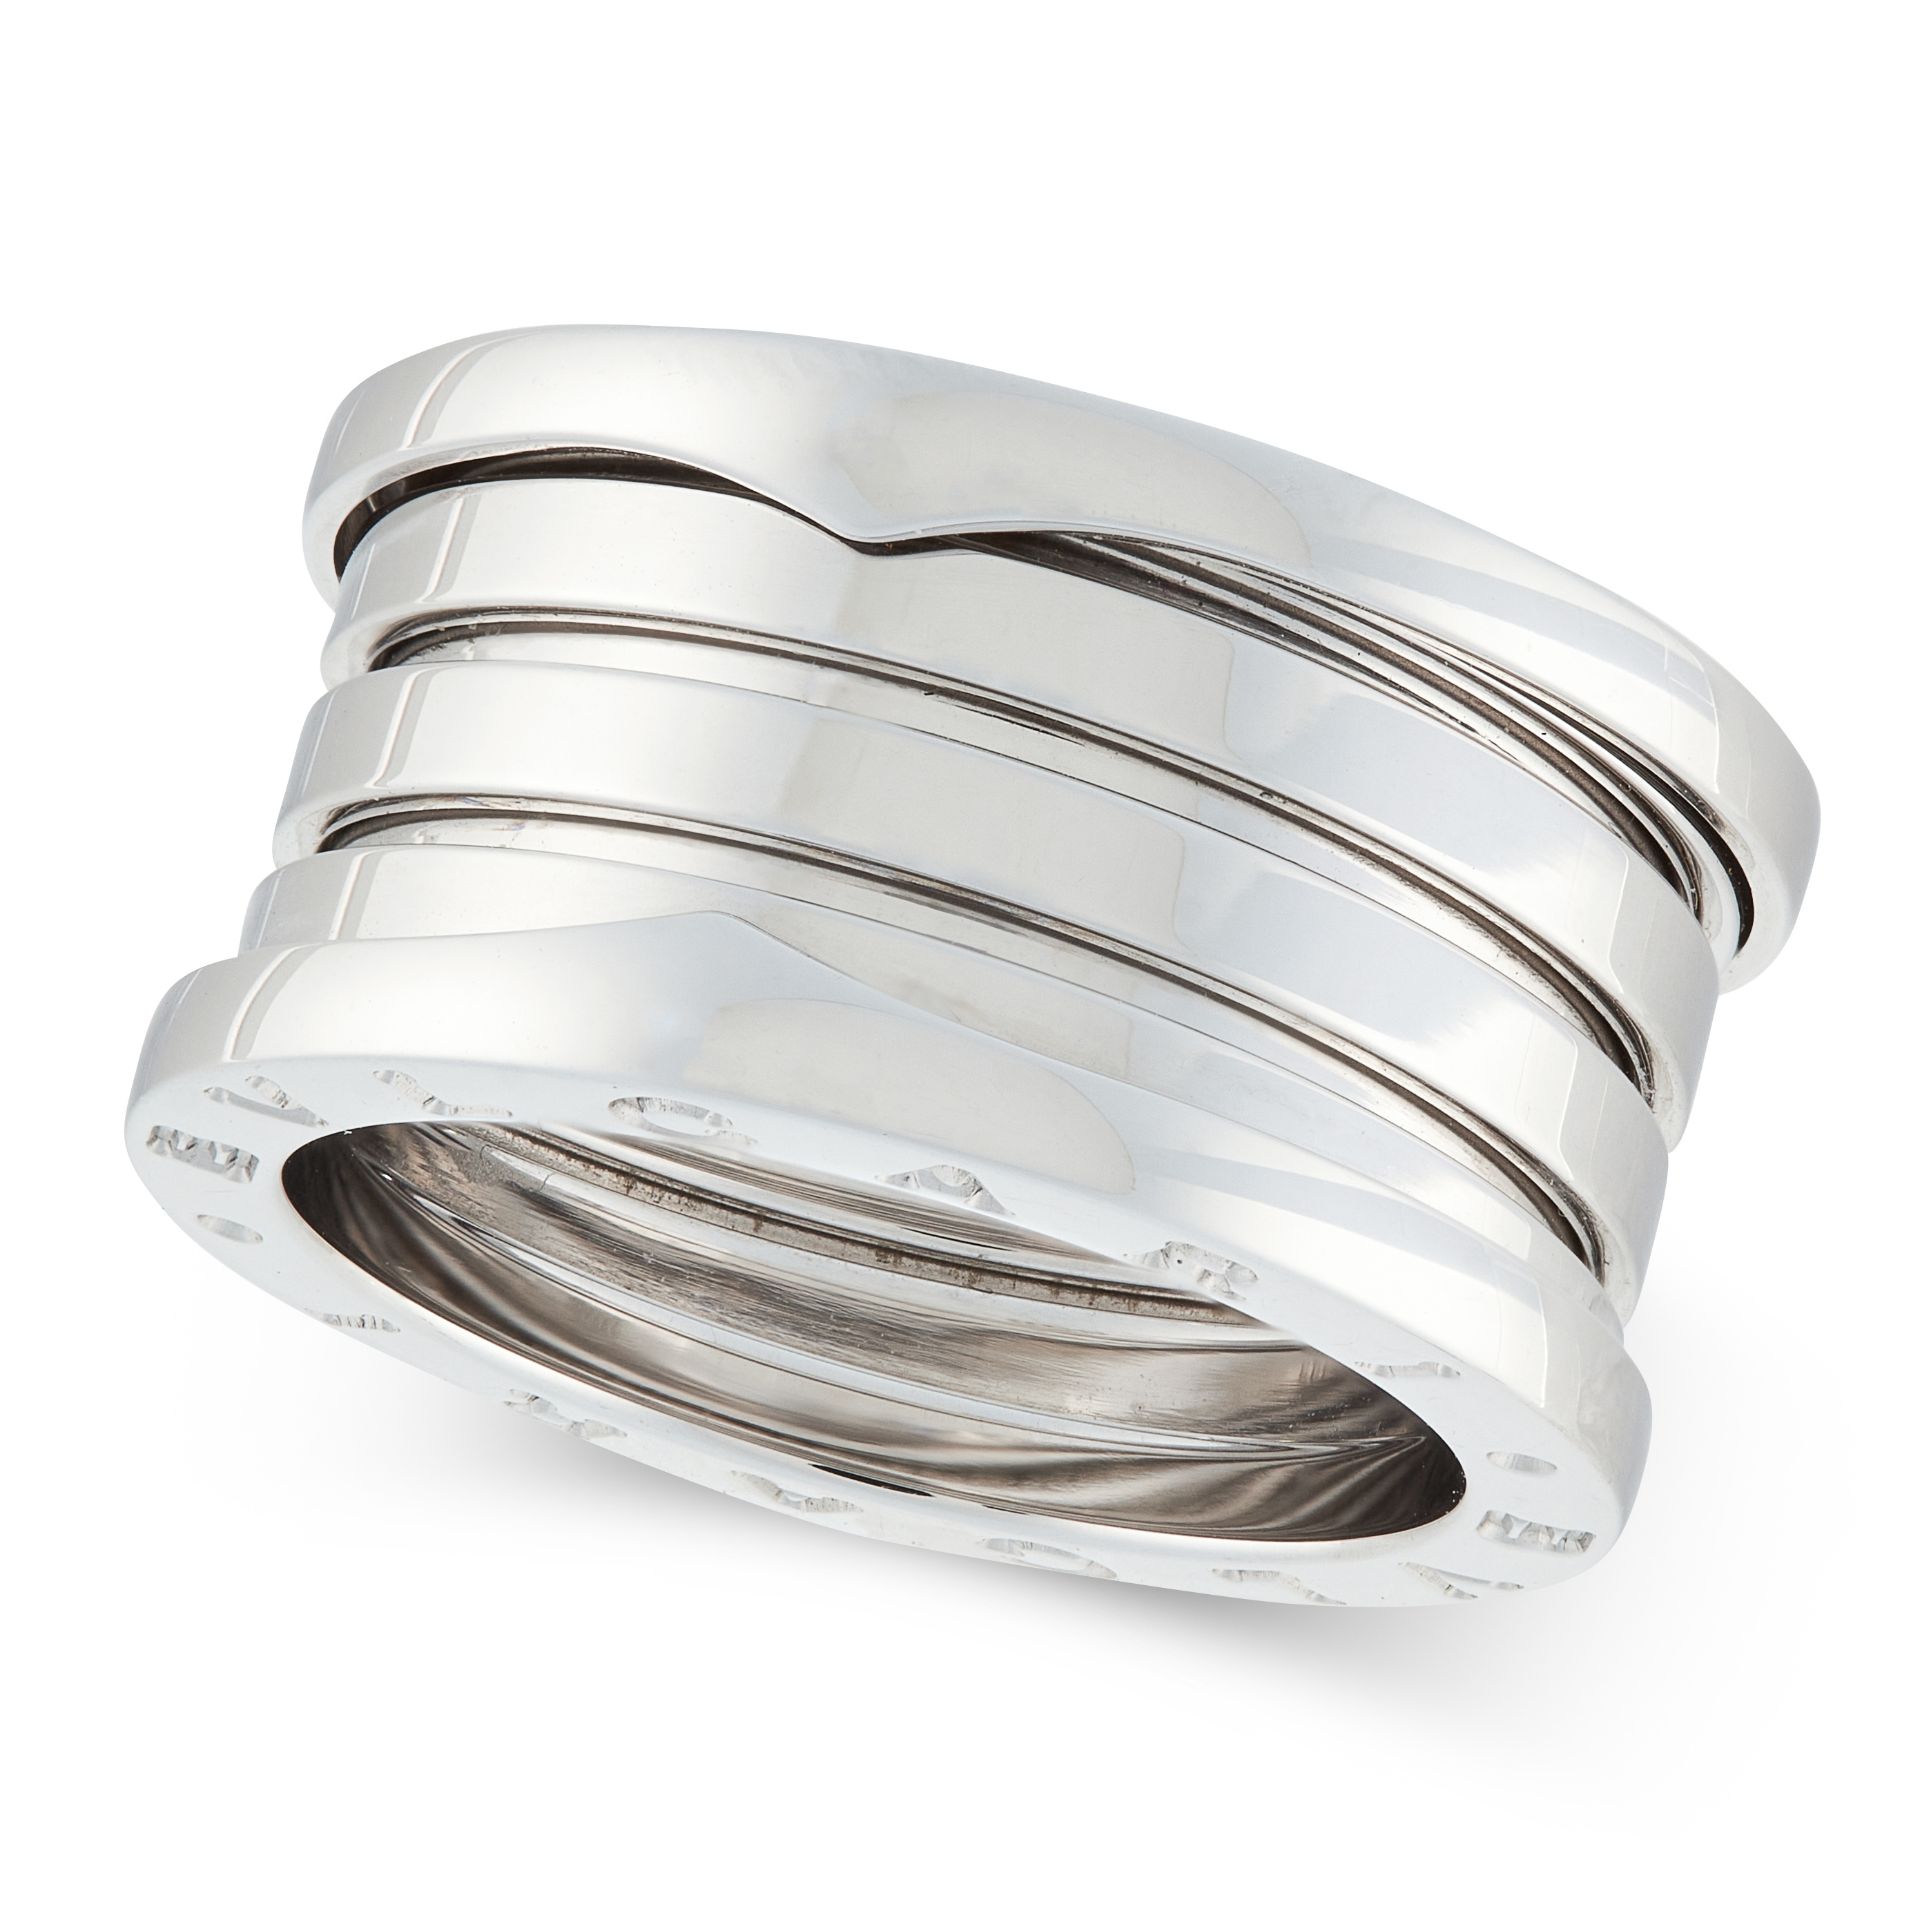 A B.ZERO1 BAND RING, BULGARI in 18ct white gold, designed as an articulated band, signed Bvlgari,